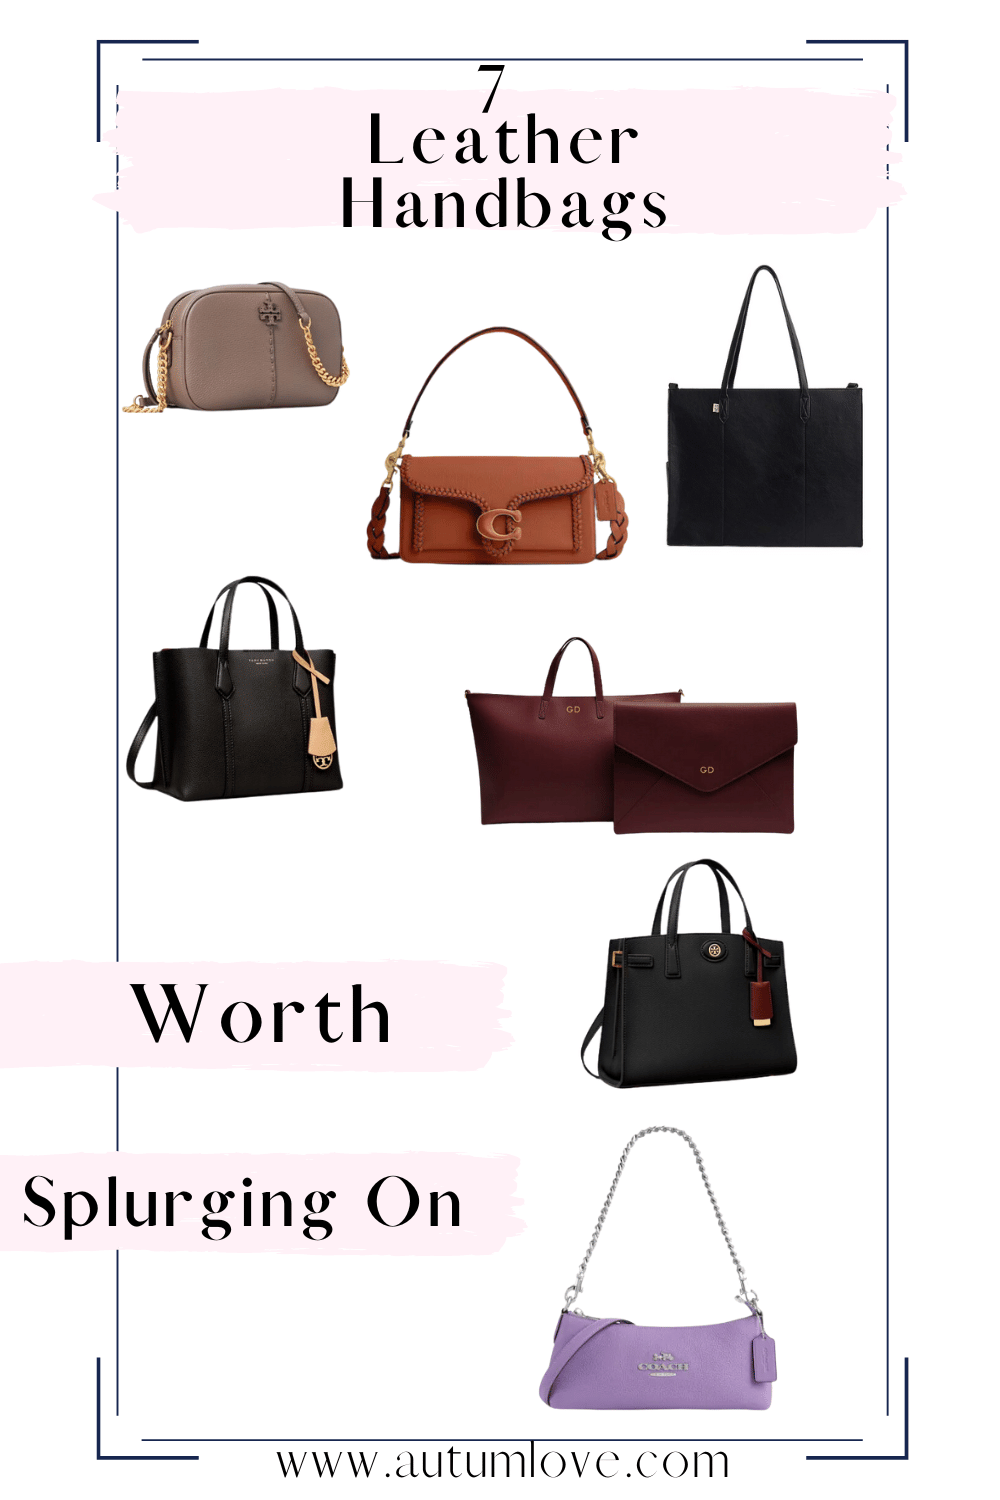 What are the different types of bags available for men? - Quora